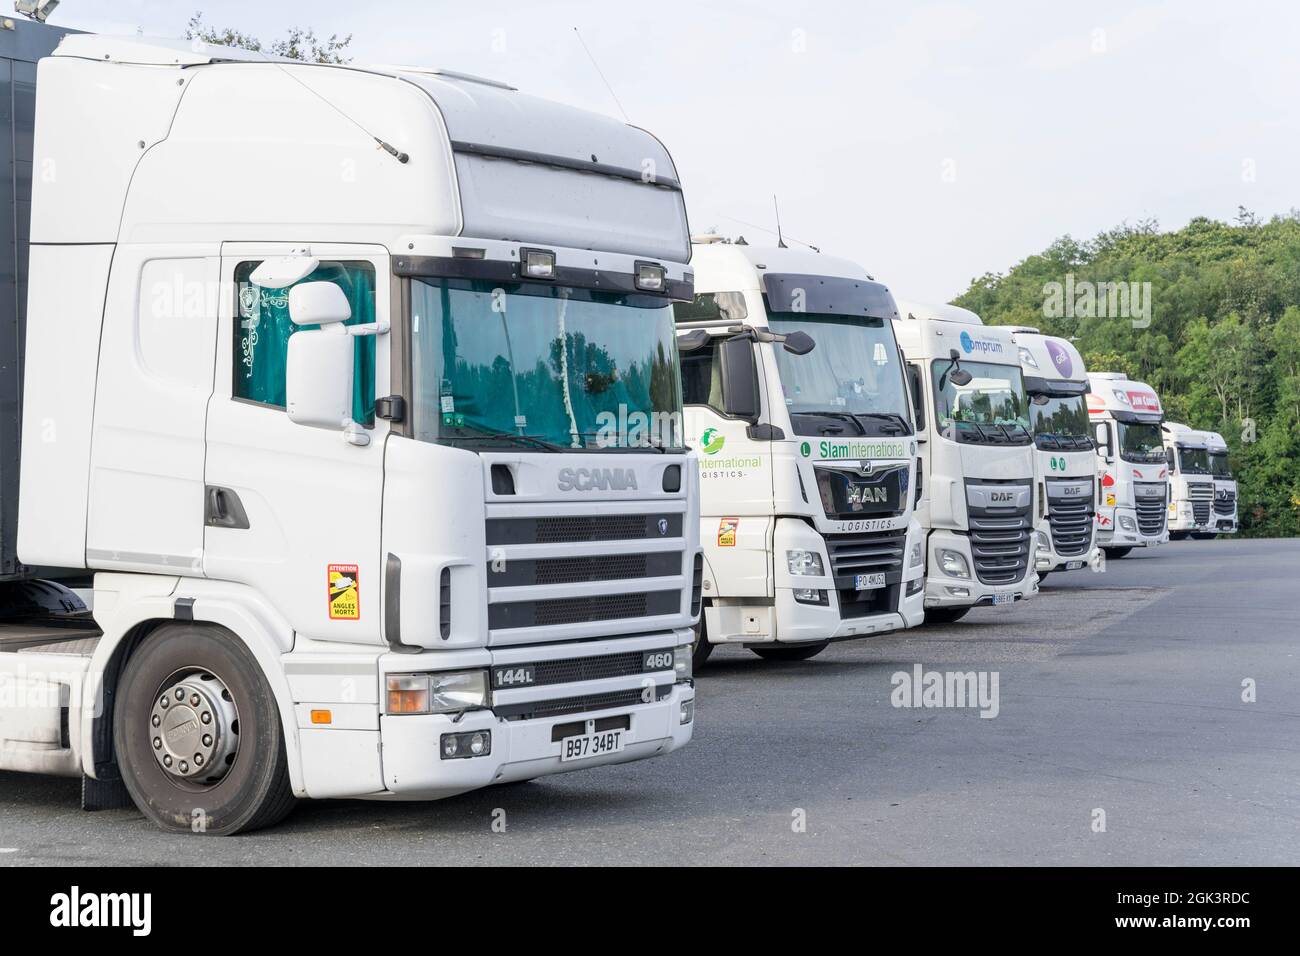 European HGV lorries stop for overnight in Kent England Stock Photo